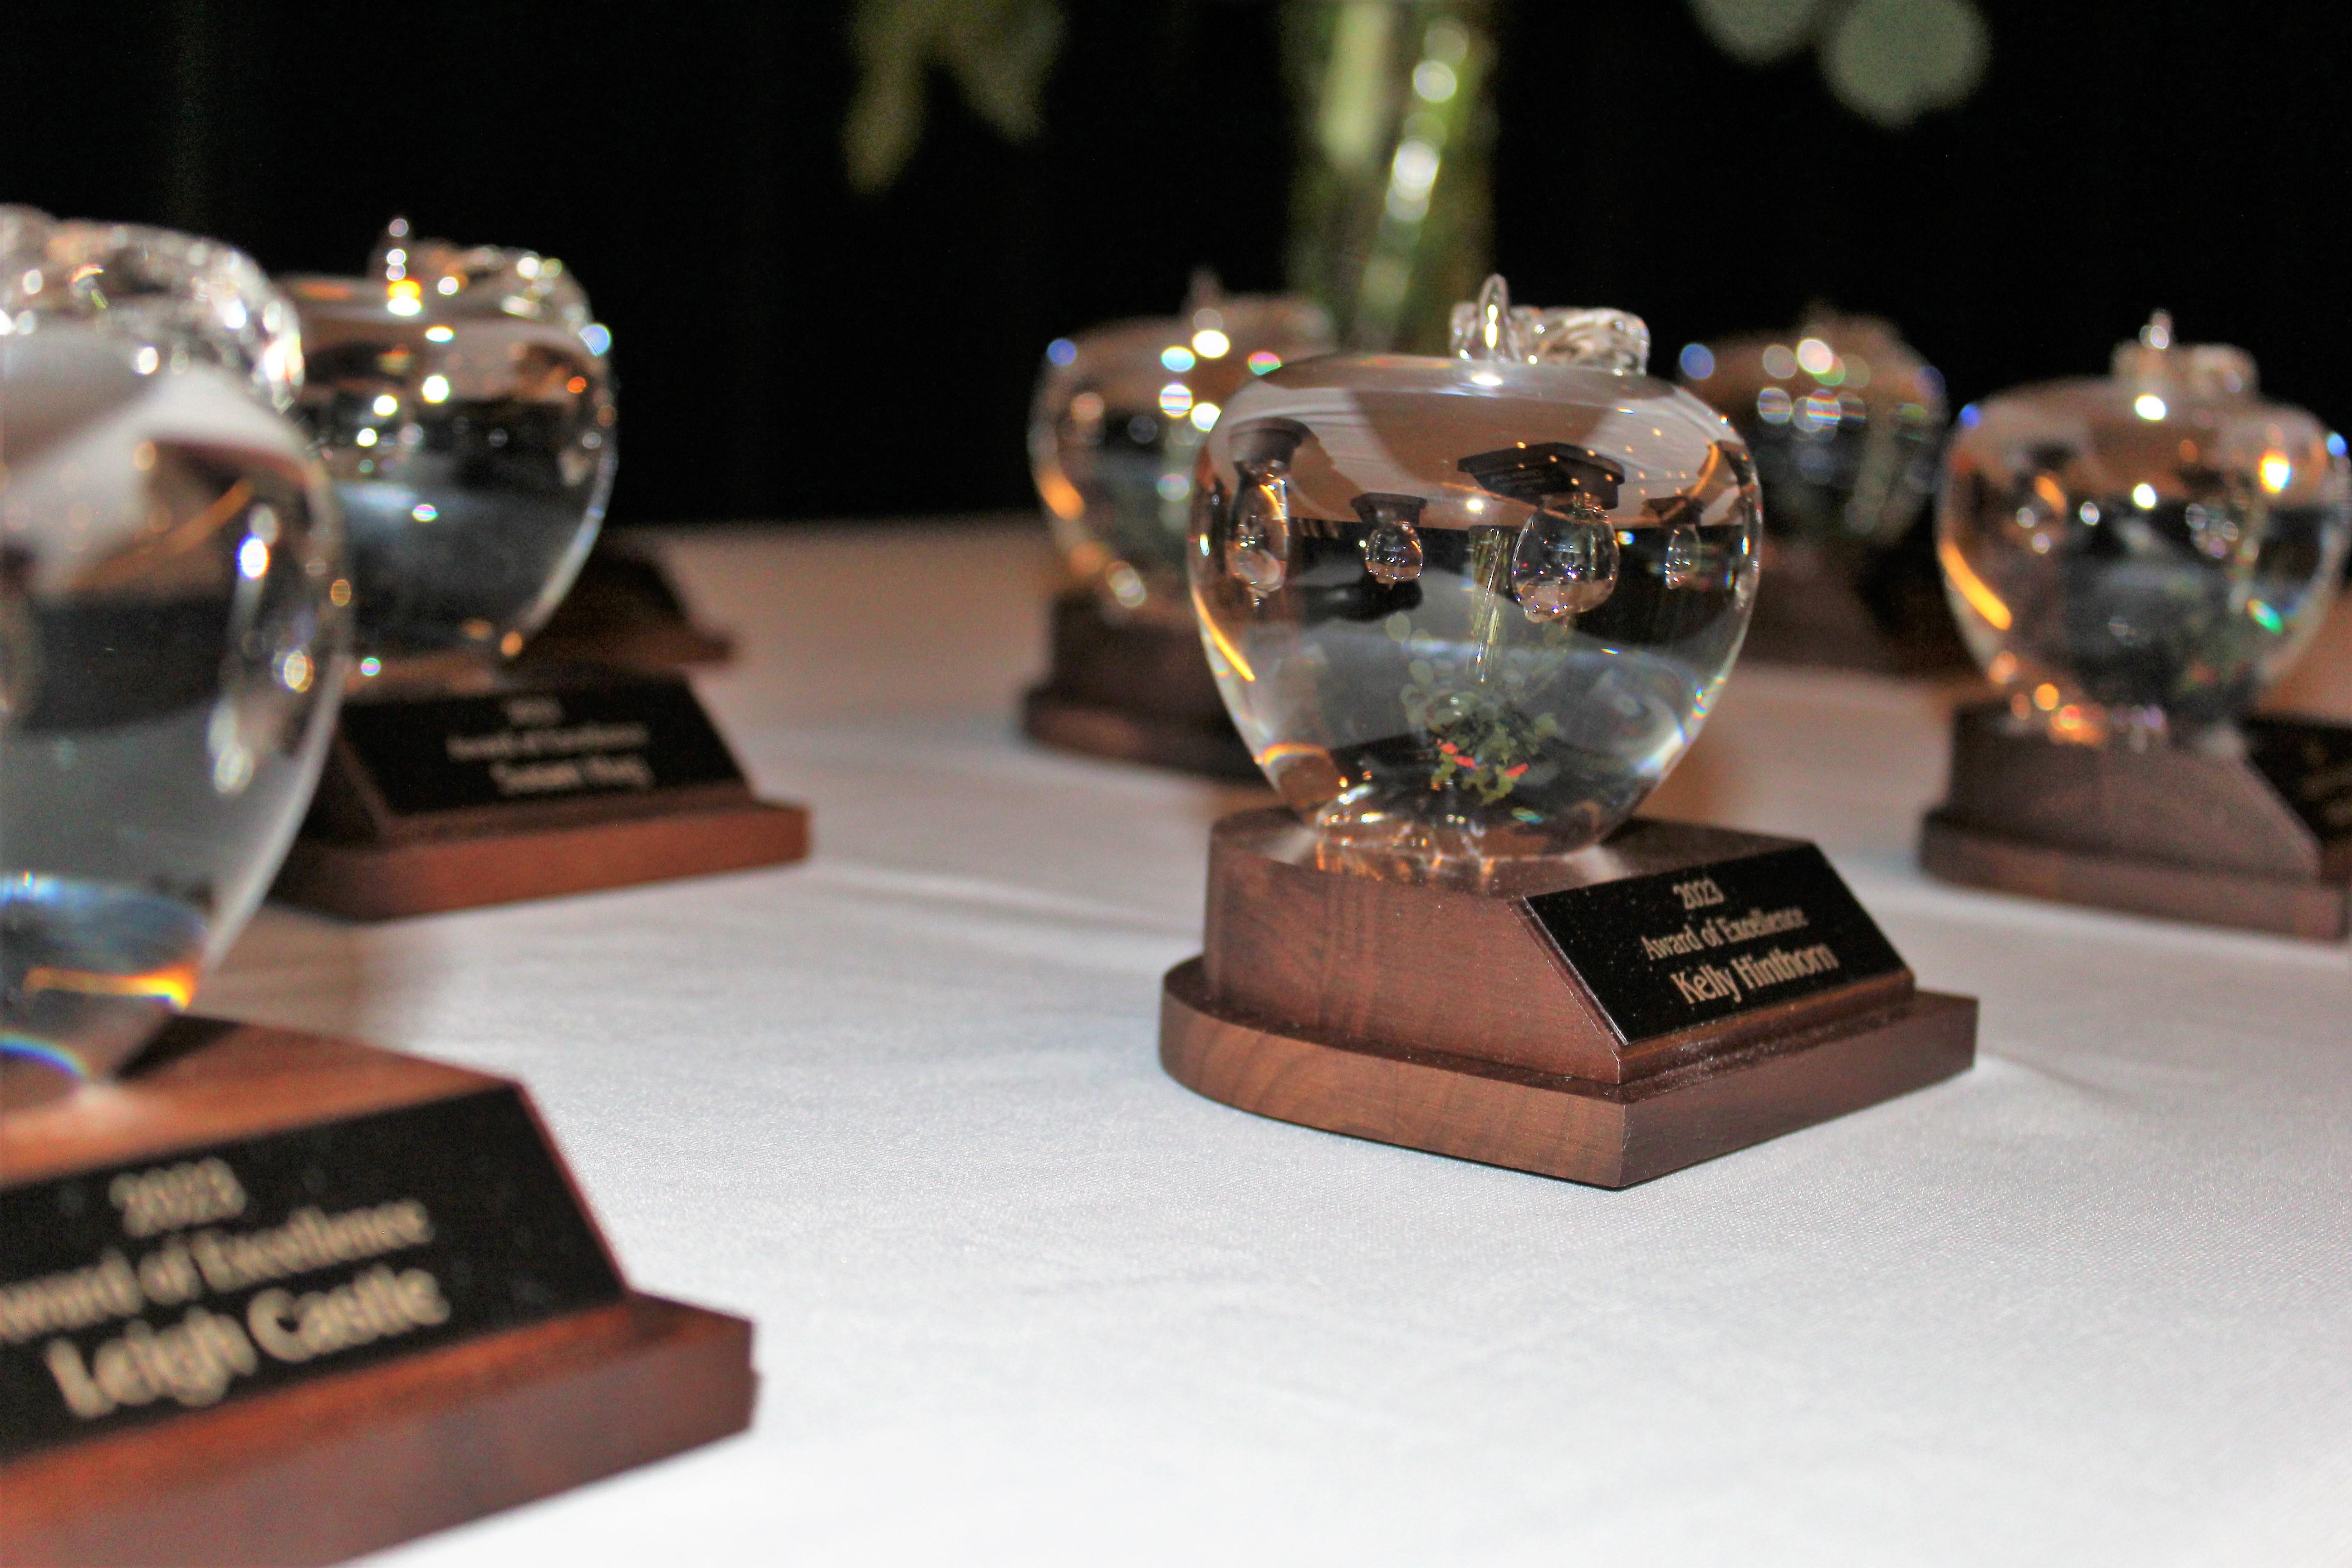 crystal apple awards are lined up on a table